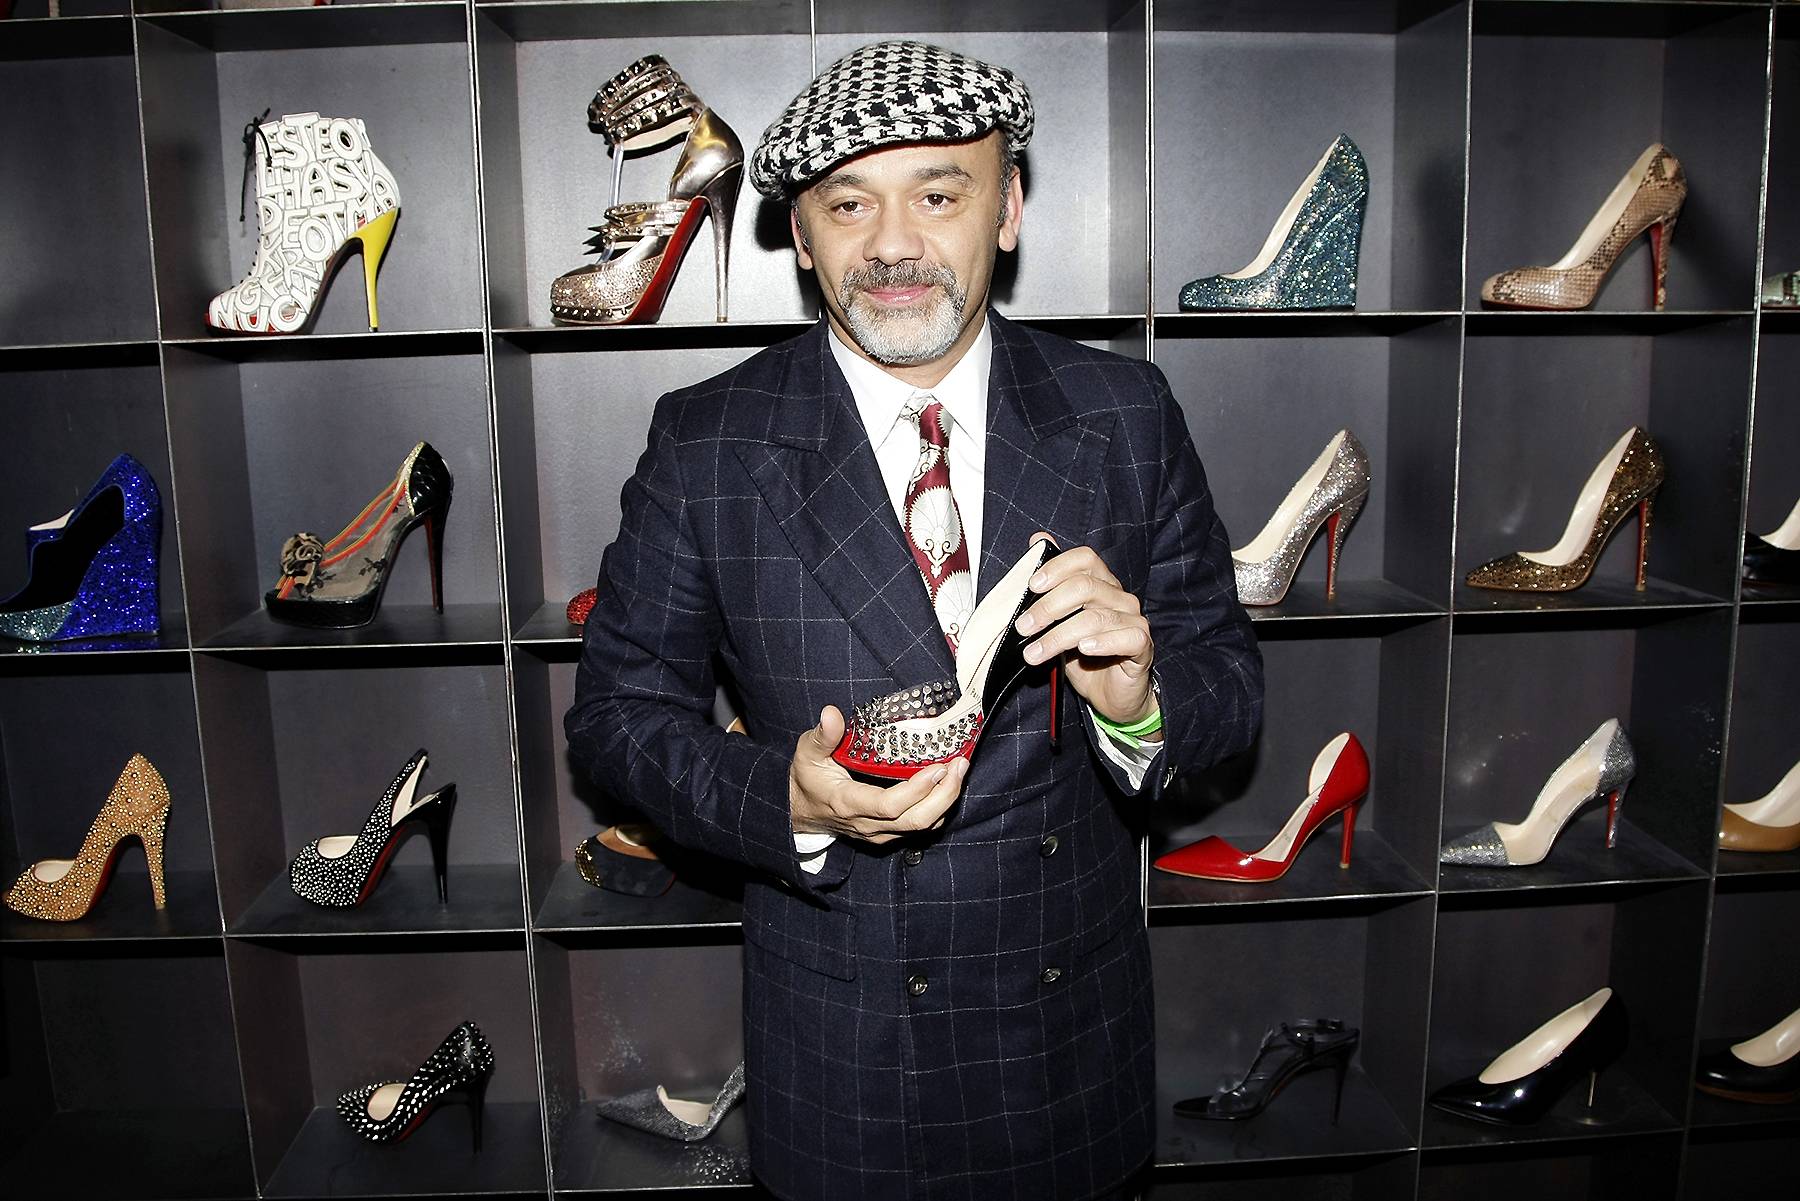 Iconic Shoe Designer Christian Louboutin Now Has A Baby Line, News